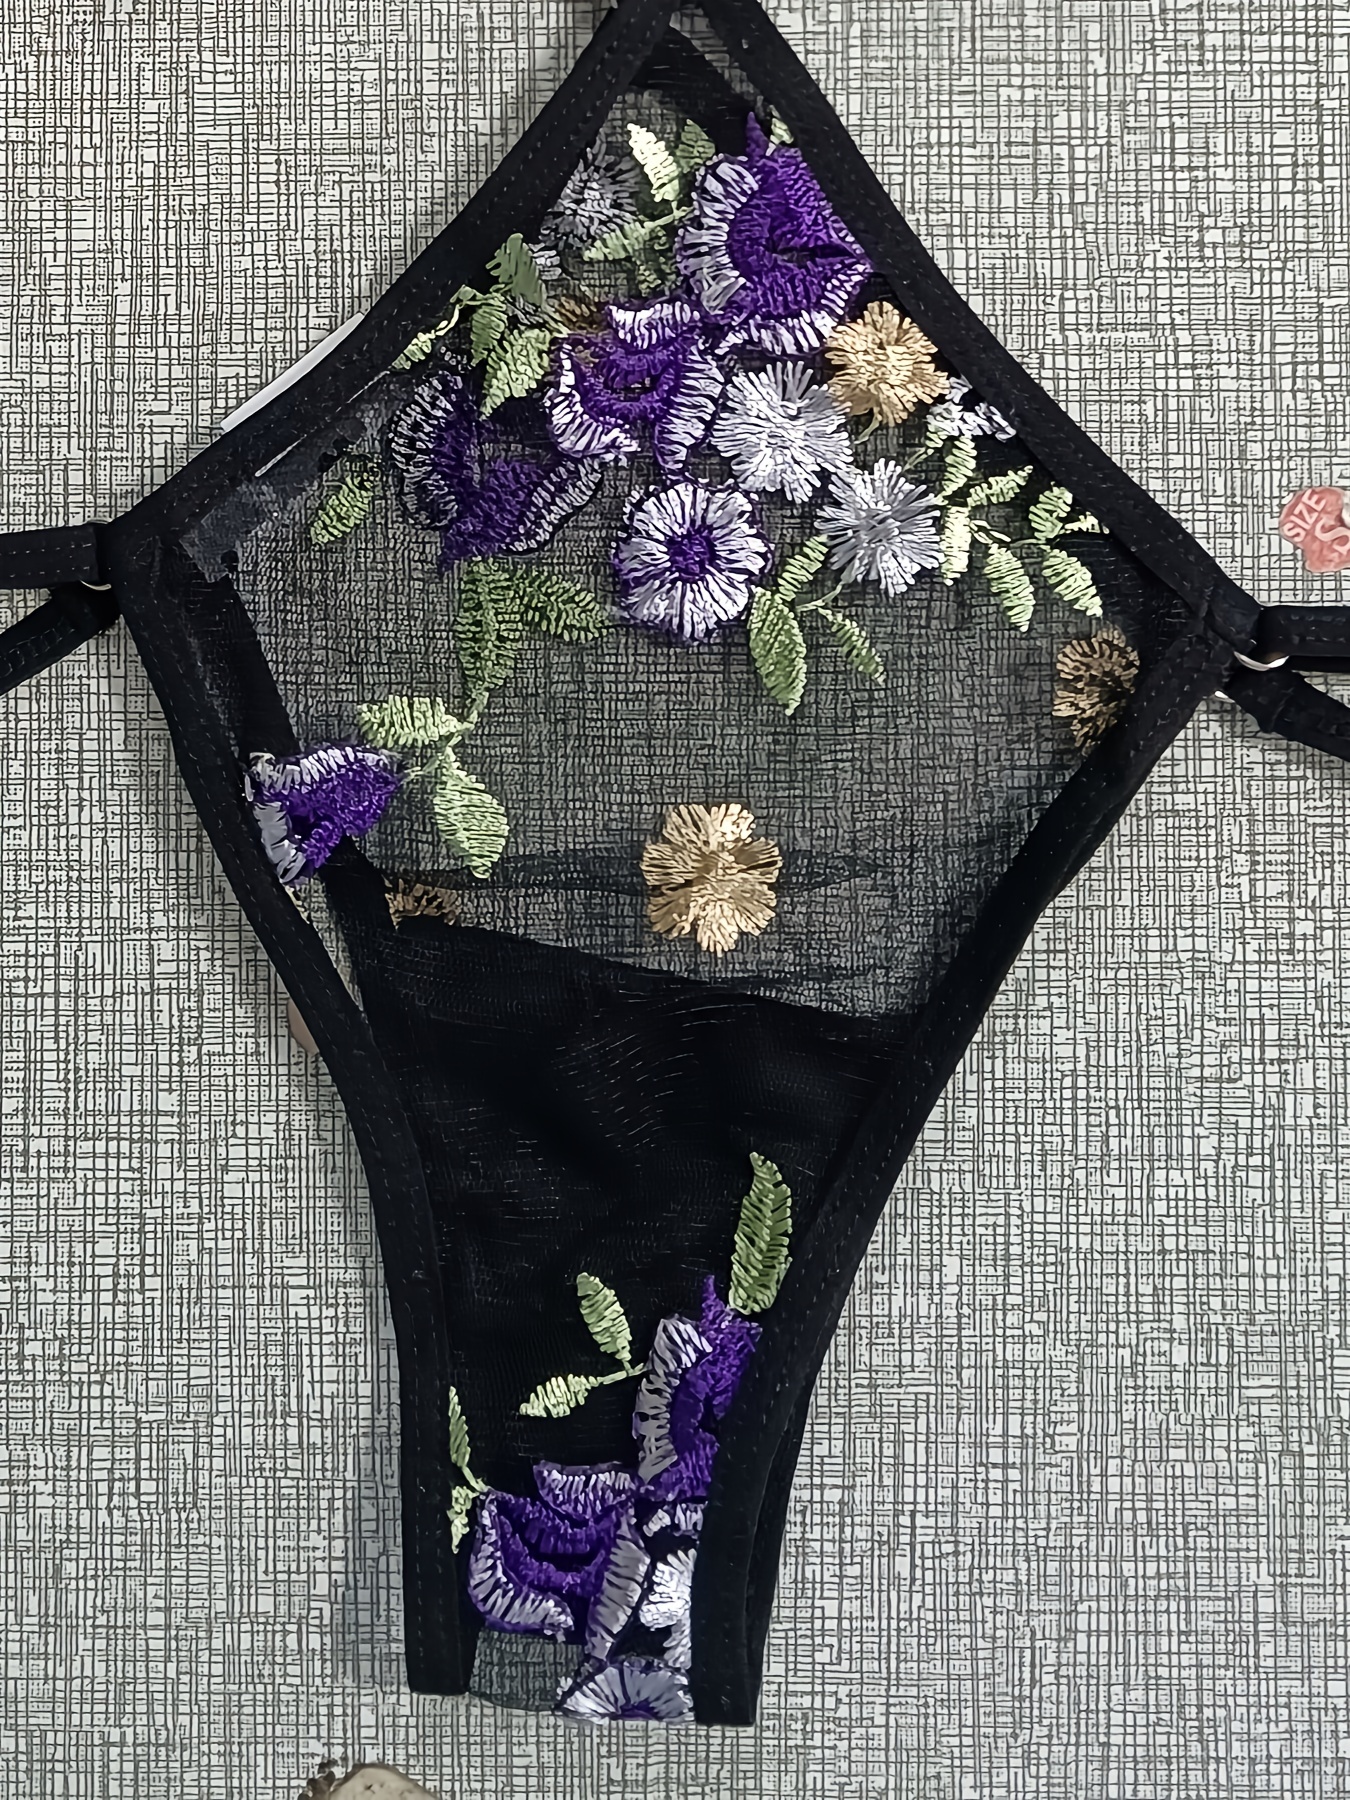 Floral Embroidery Lingerie Set, Cut Out Unlined Bra & Mesh Thong, Women's  Sexy Lingerie & Underwear